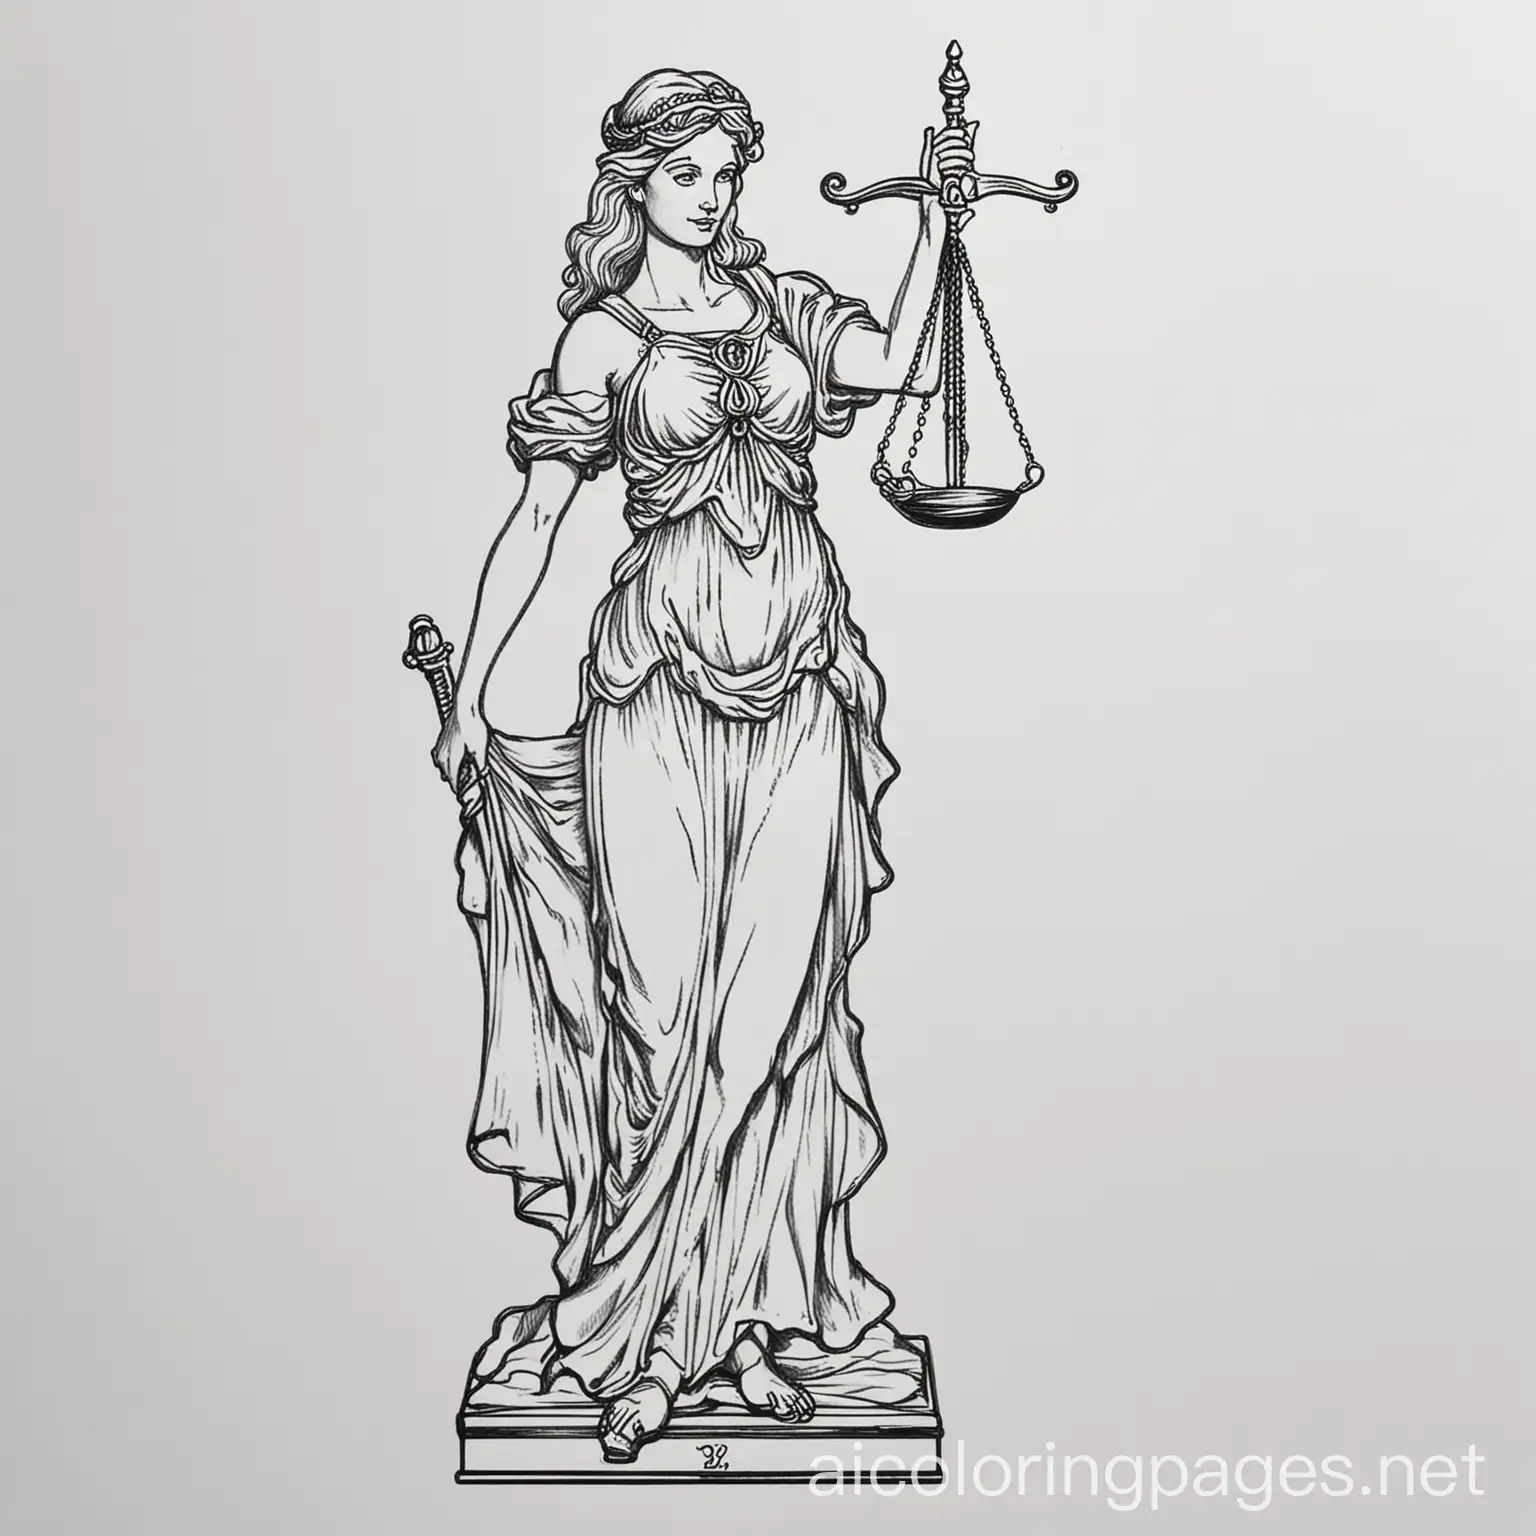 Lady Justice, Coloring Page, black and white, line art, white background, Simplicity, Ample White Space. The background of the coloring page is plain white to make it easy for young children to color within the lines. The outlines of all the subjects are easy to distinguish, making it simple for kids to color without too much difficulty